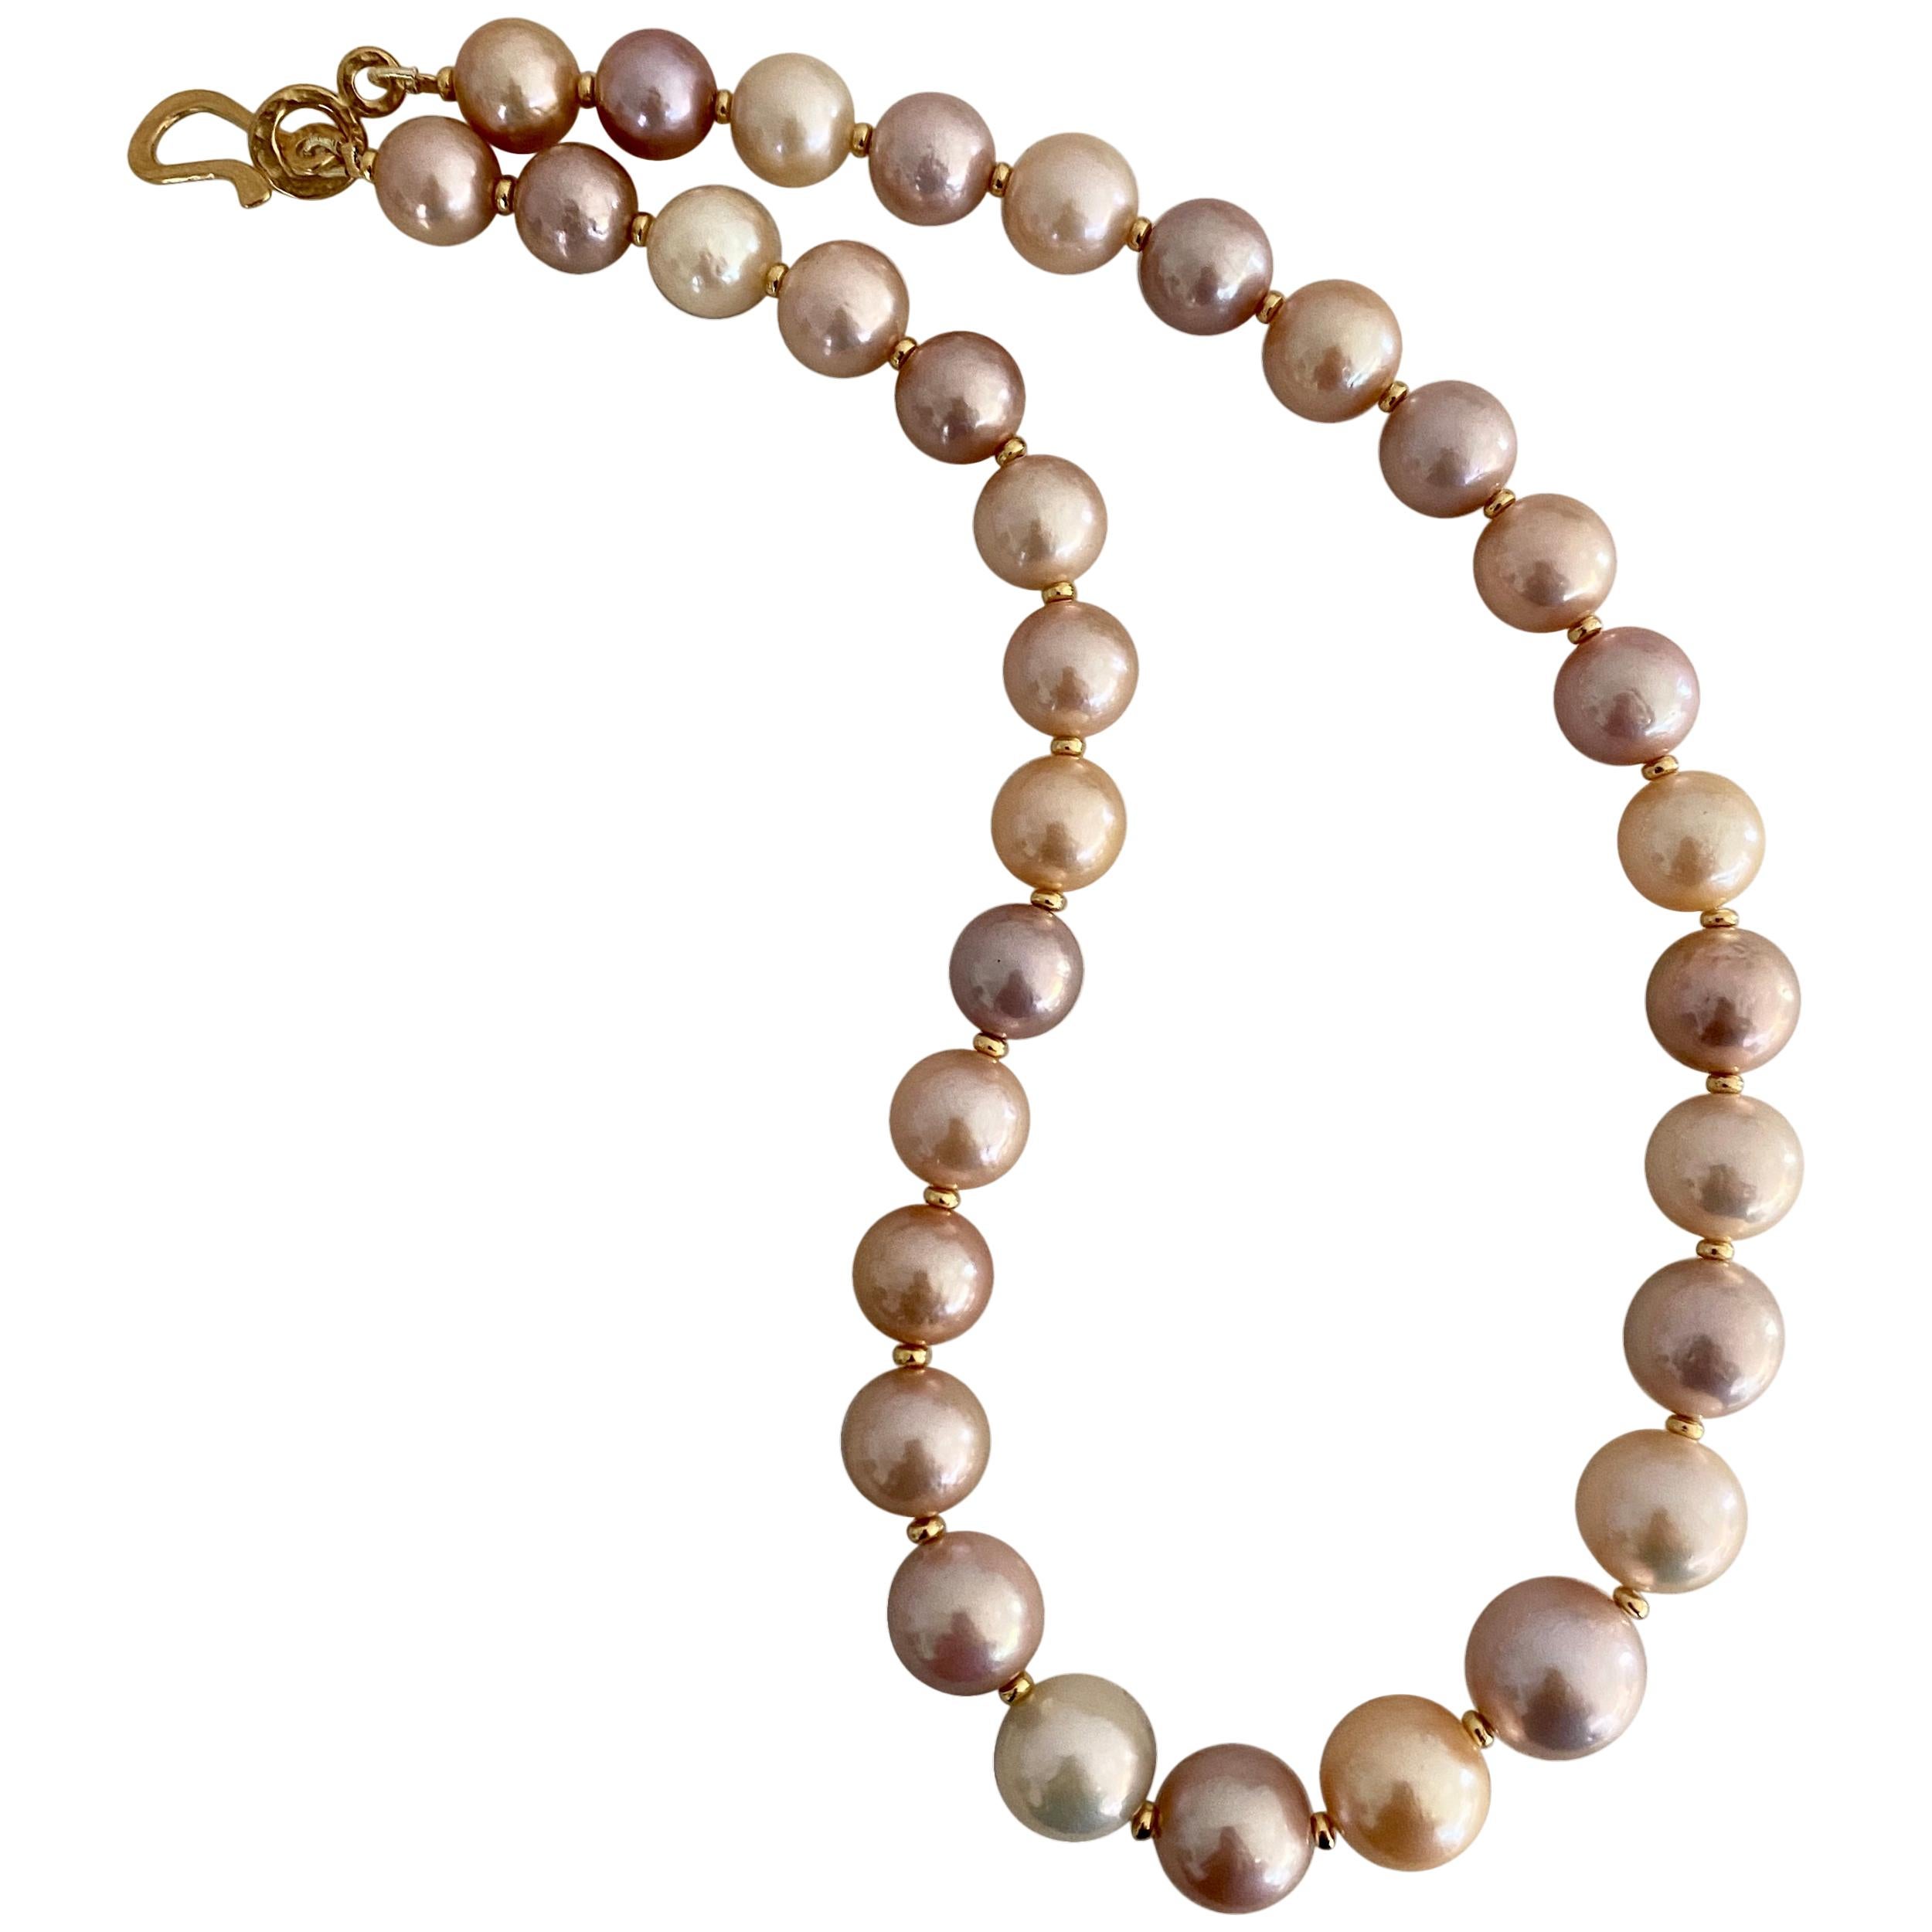 Tourmaline Bead and Cultured Freshwater Stick Pearl Necklace 24-inch Length